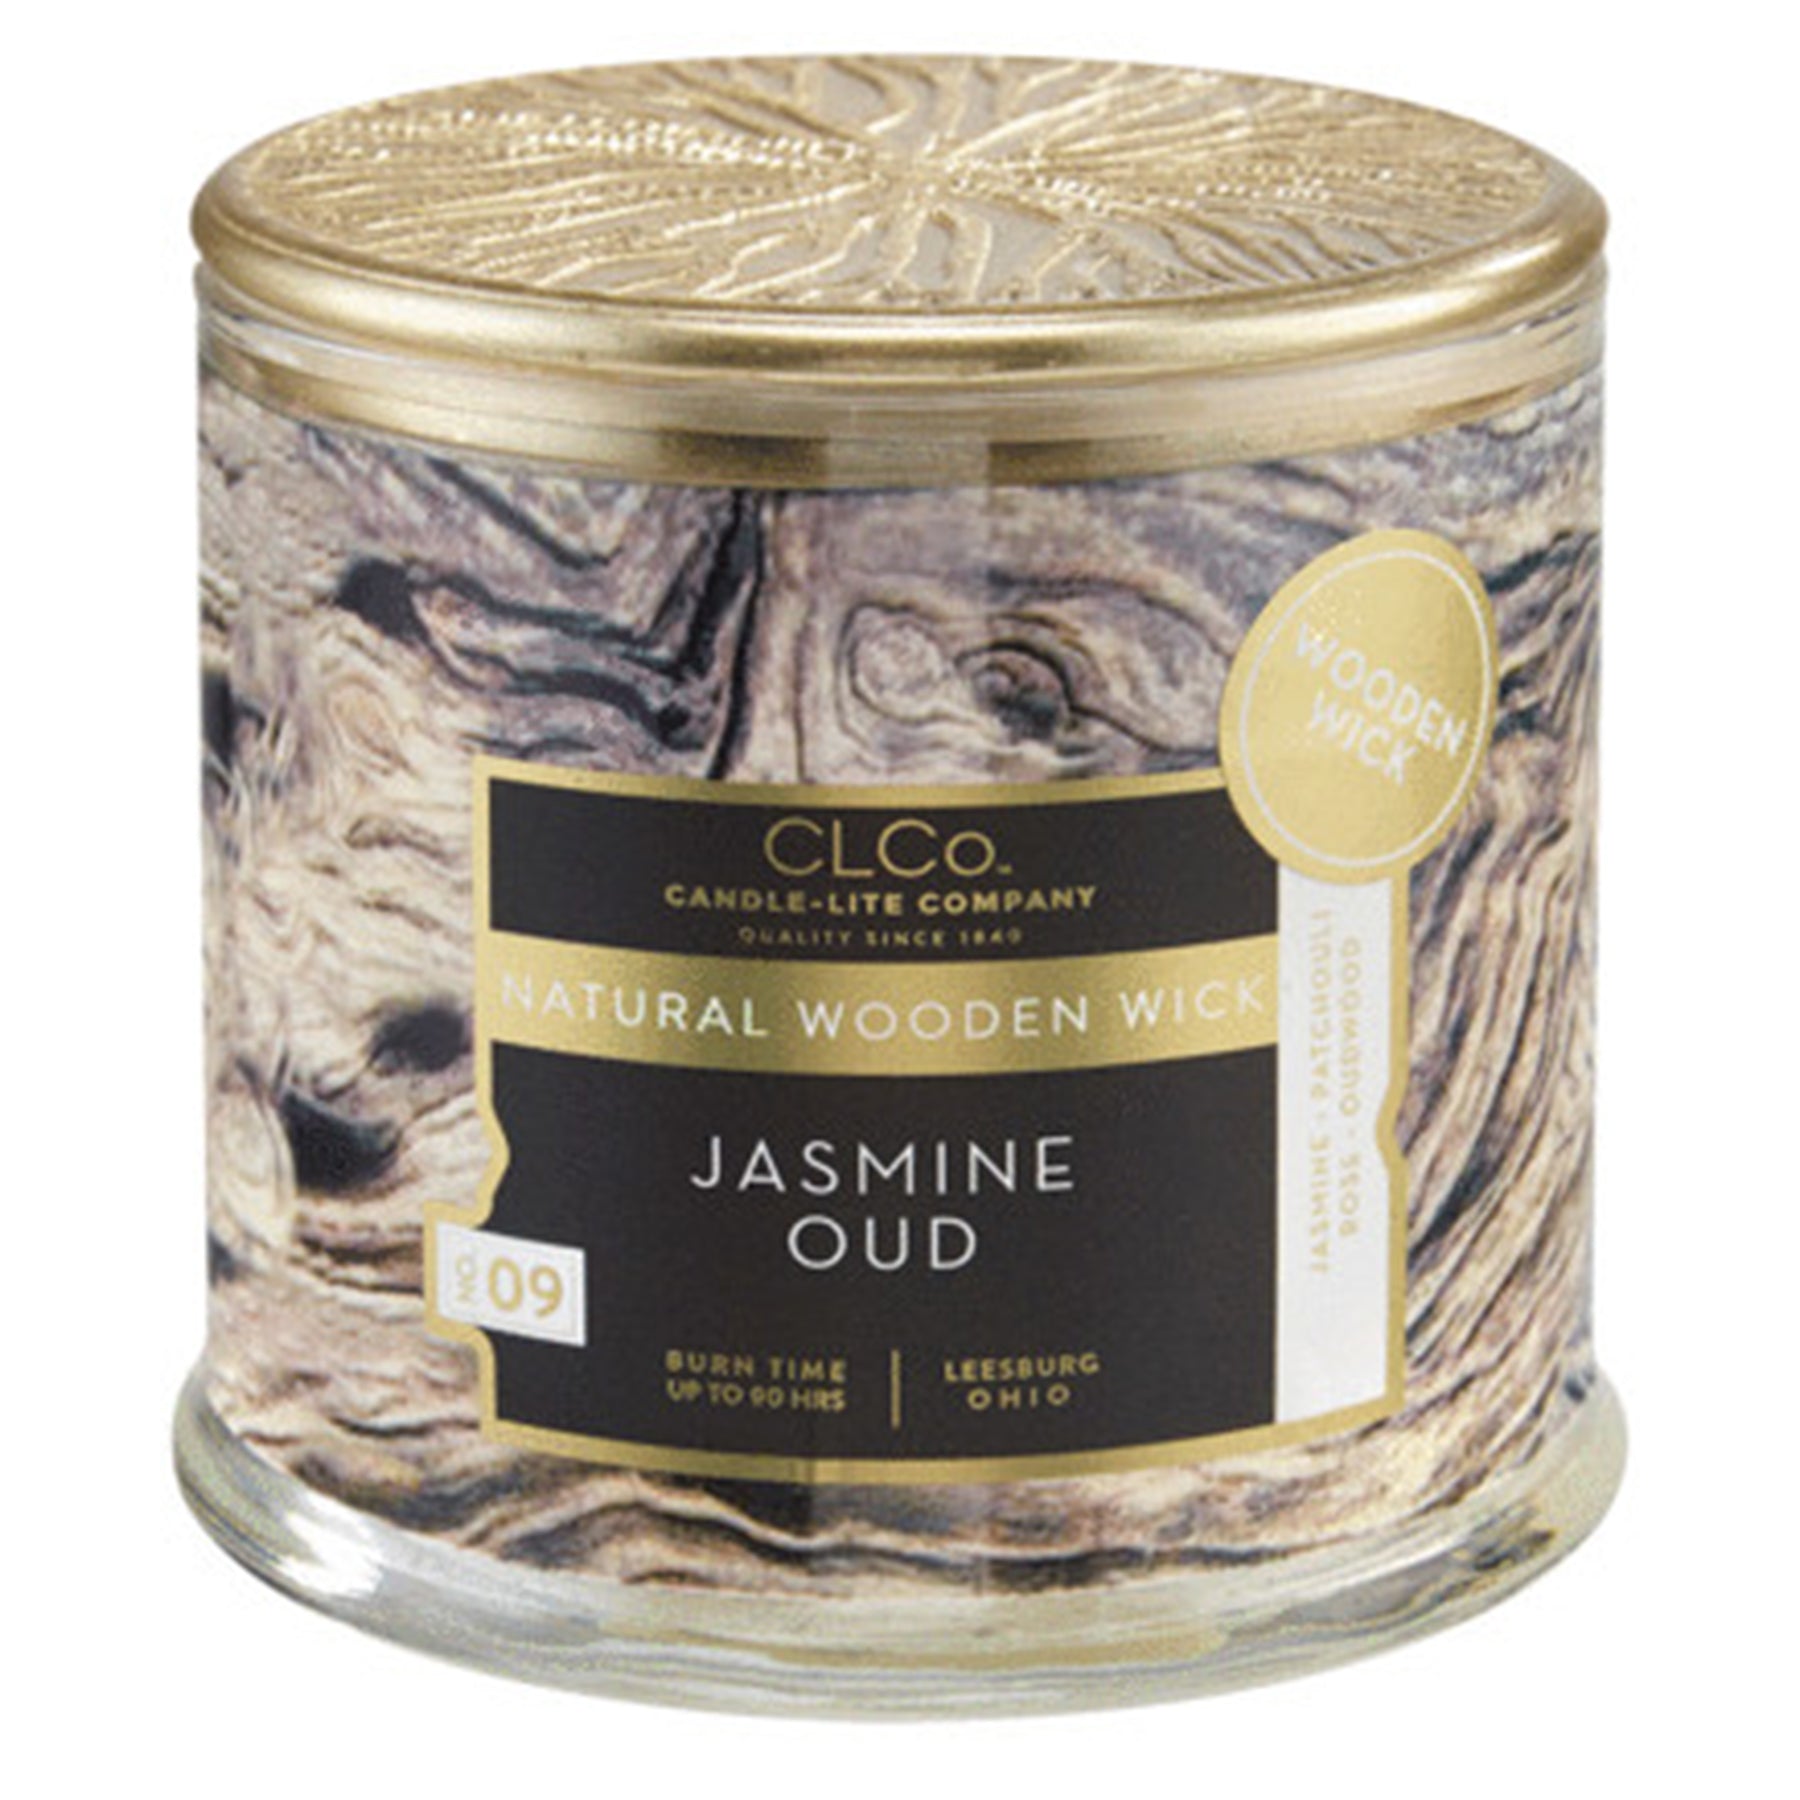 Jasmine Oud Natural Wooden Wick Glass Jar Candle